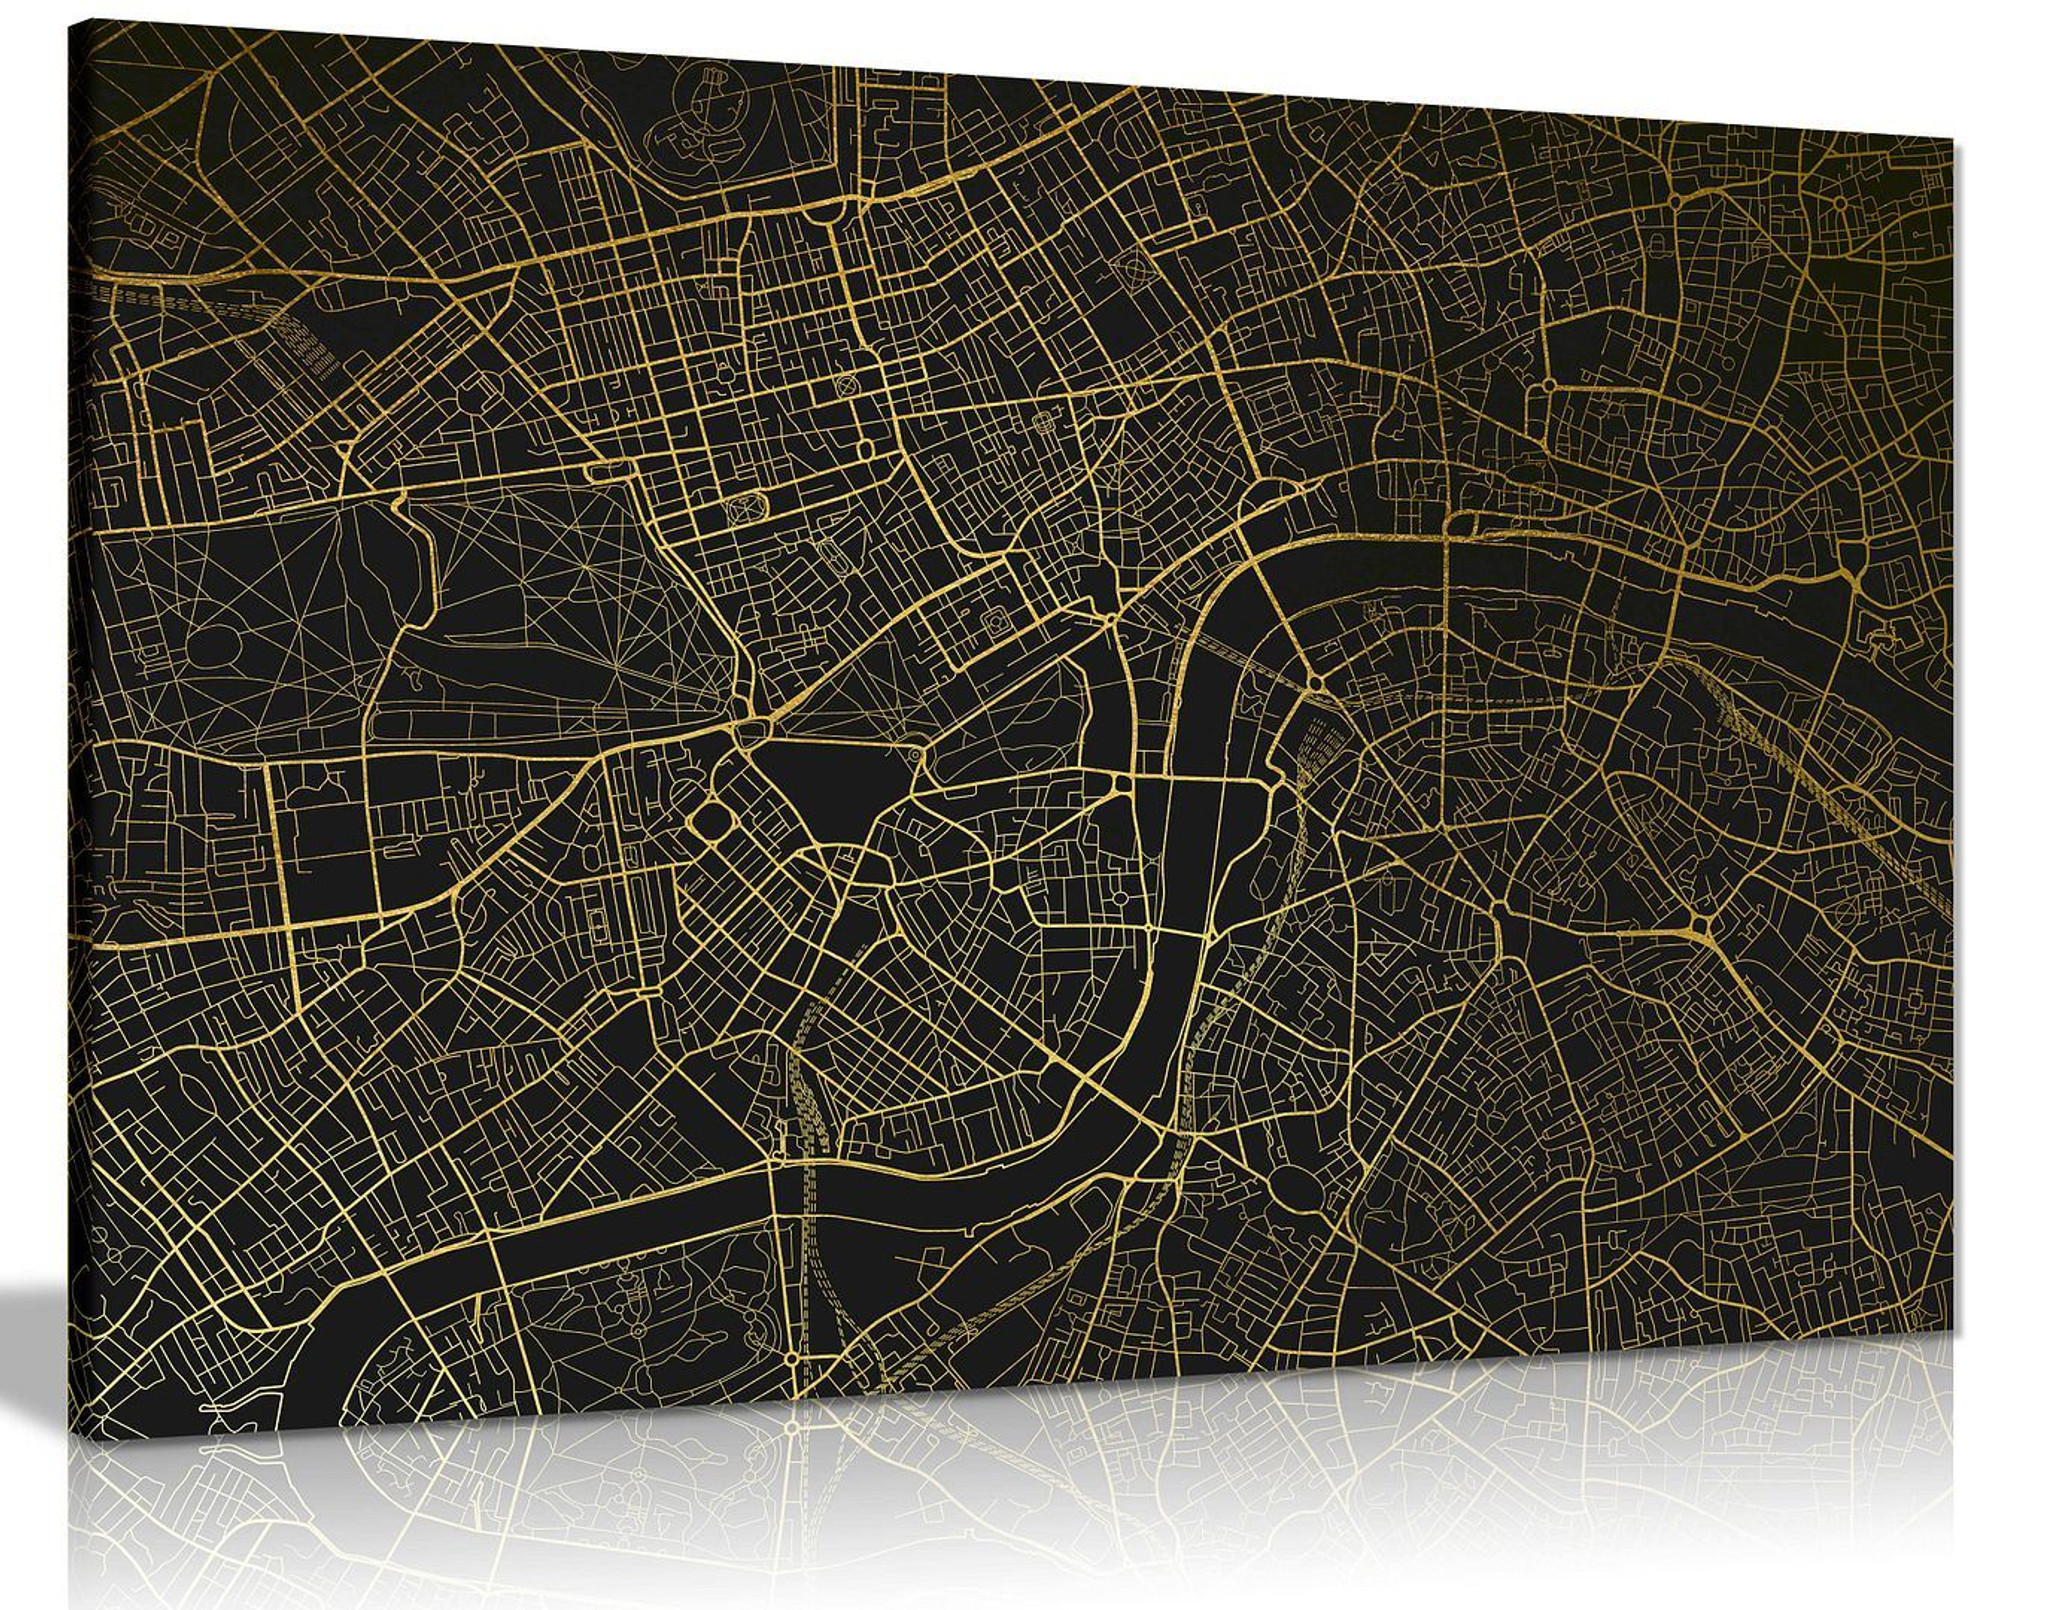 London Underground Map Gold Canvas Wall Art Picture Print Home Decor